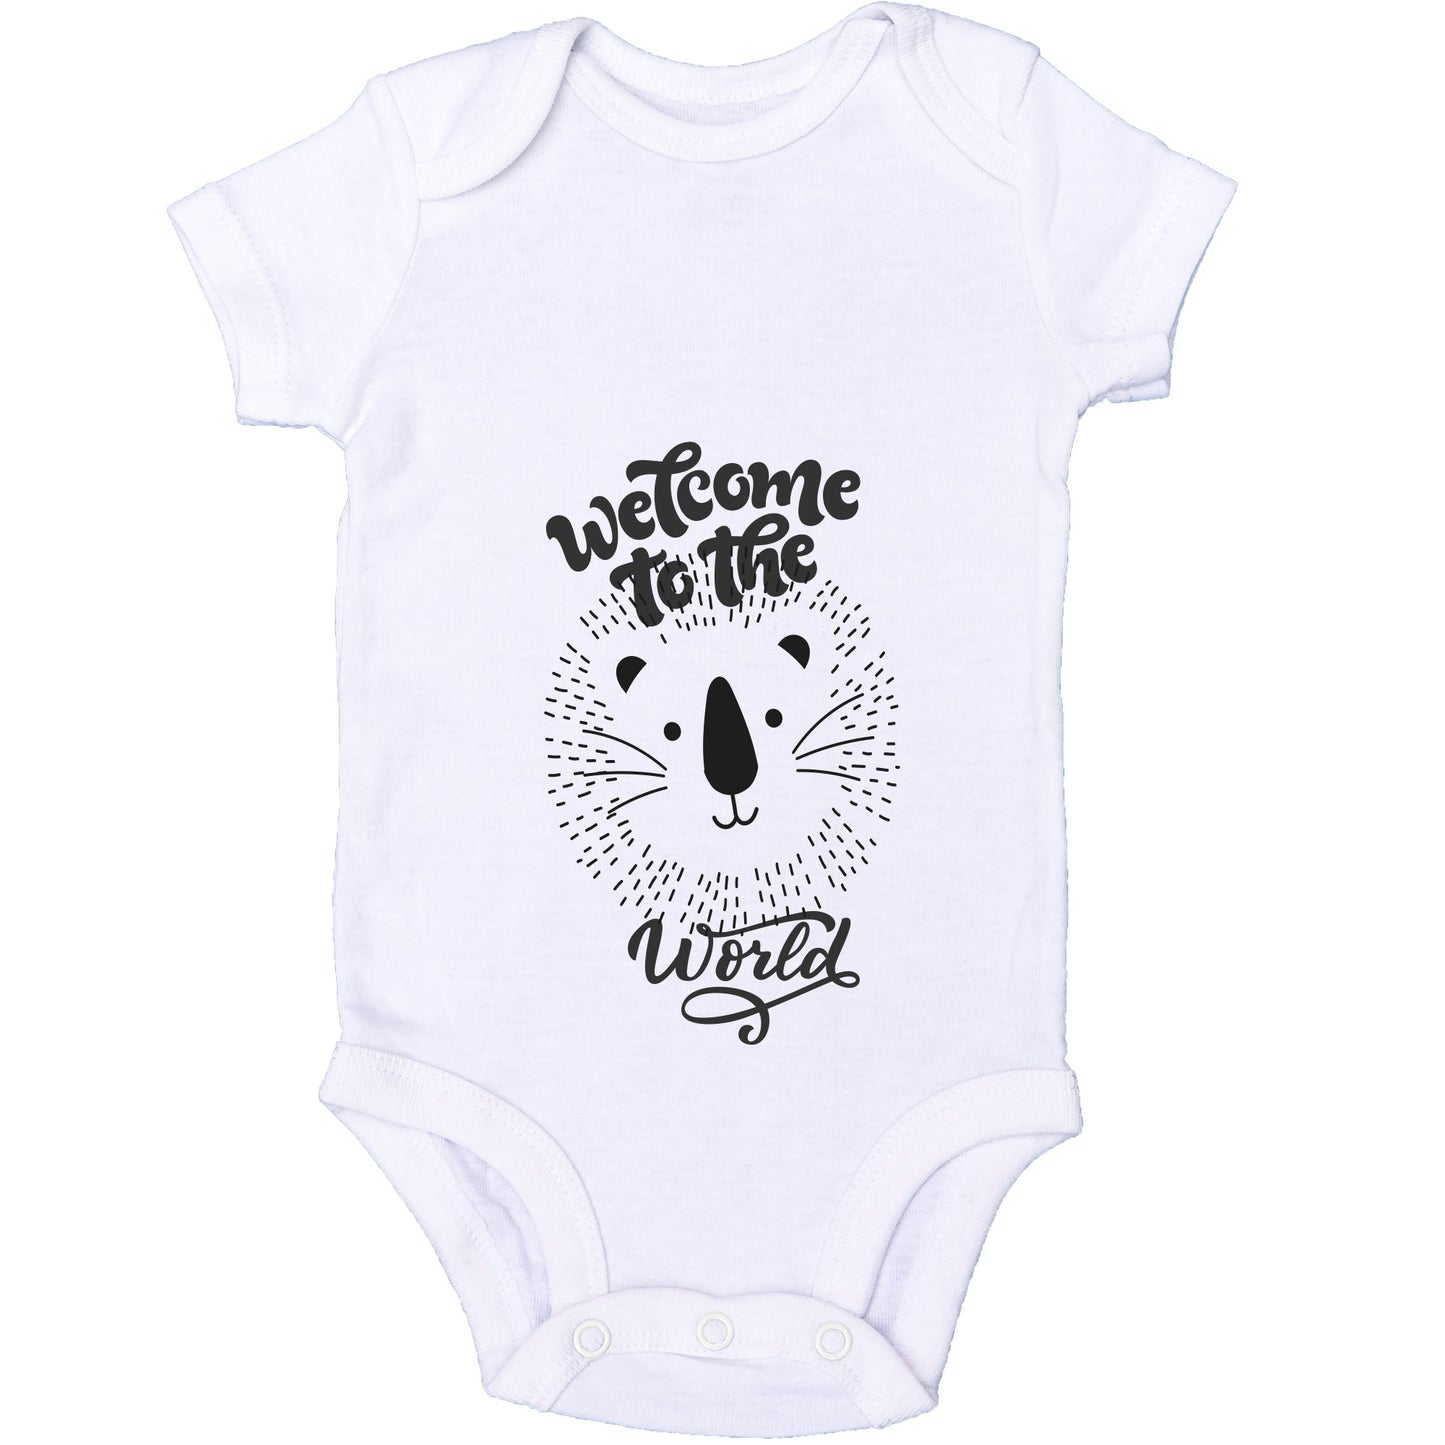 Baby Grow Welcome To The World Baby Grow 0-3 baby grow 3-6 baby grow baby grow